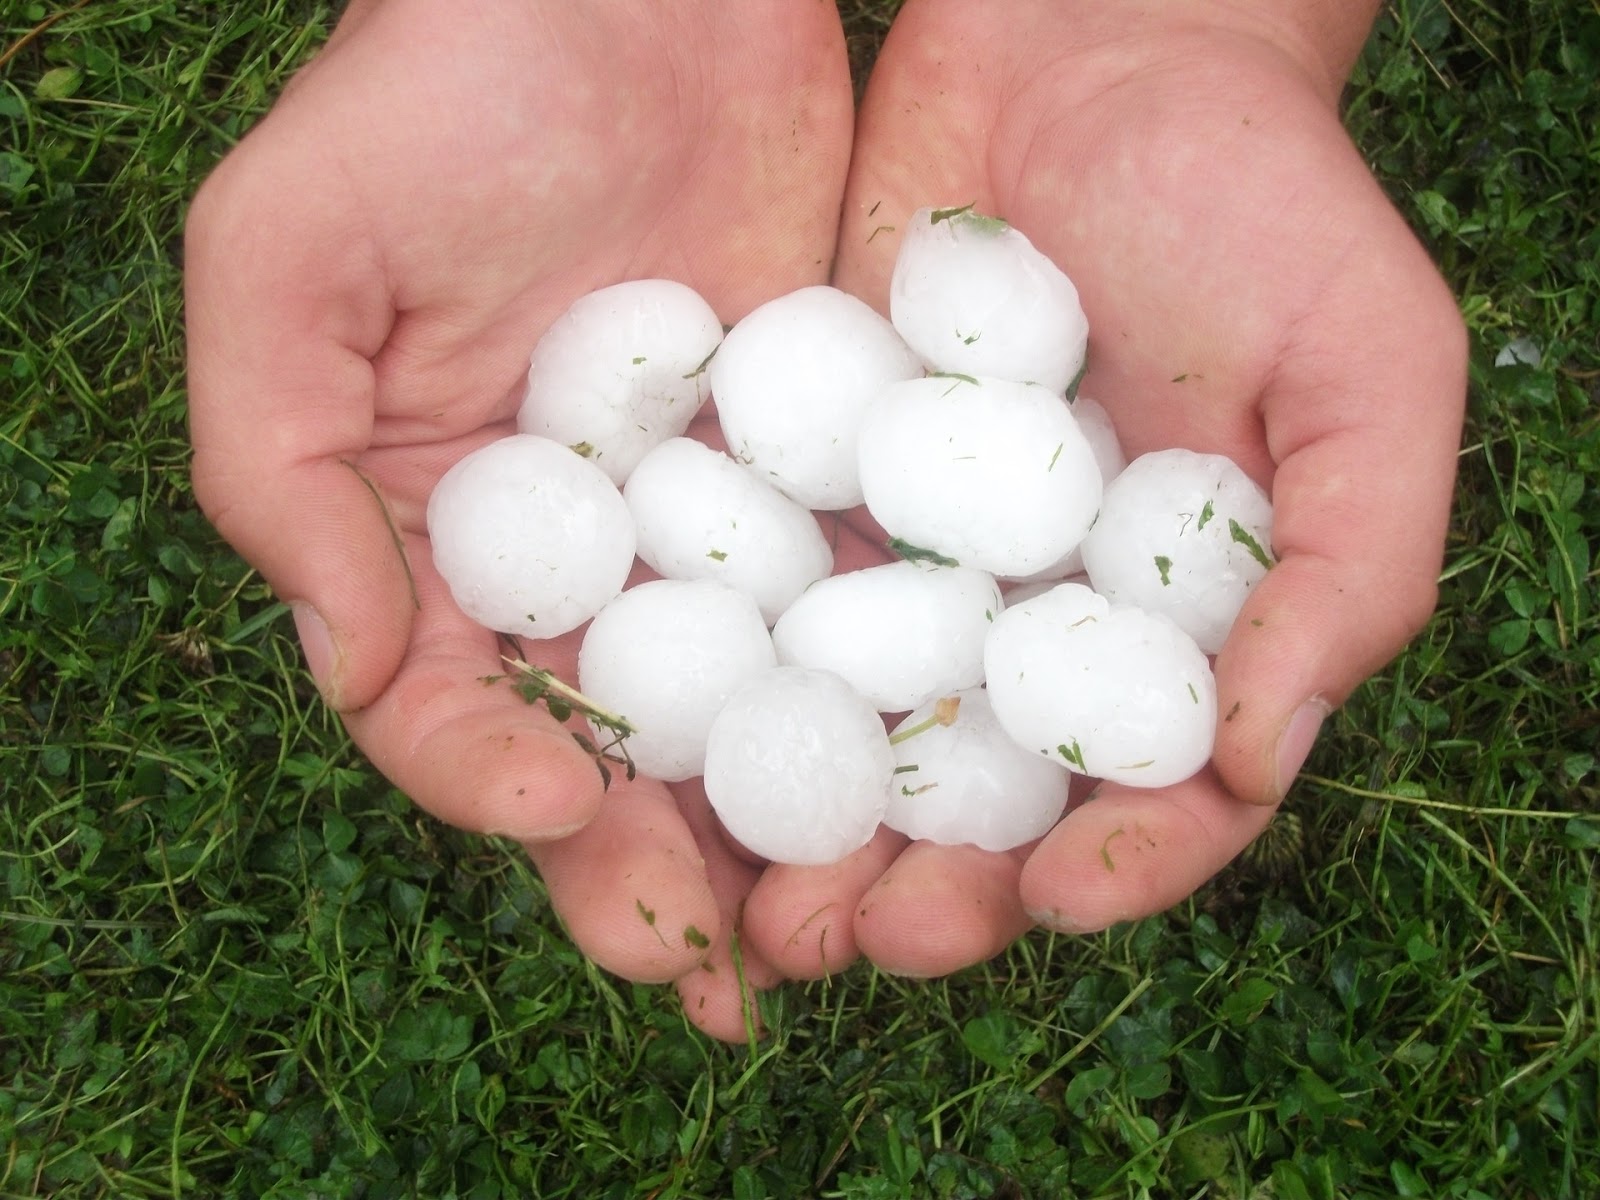 Hands holding a handful of hail